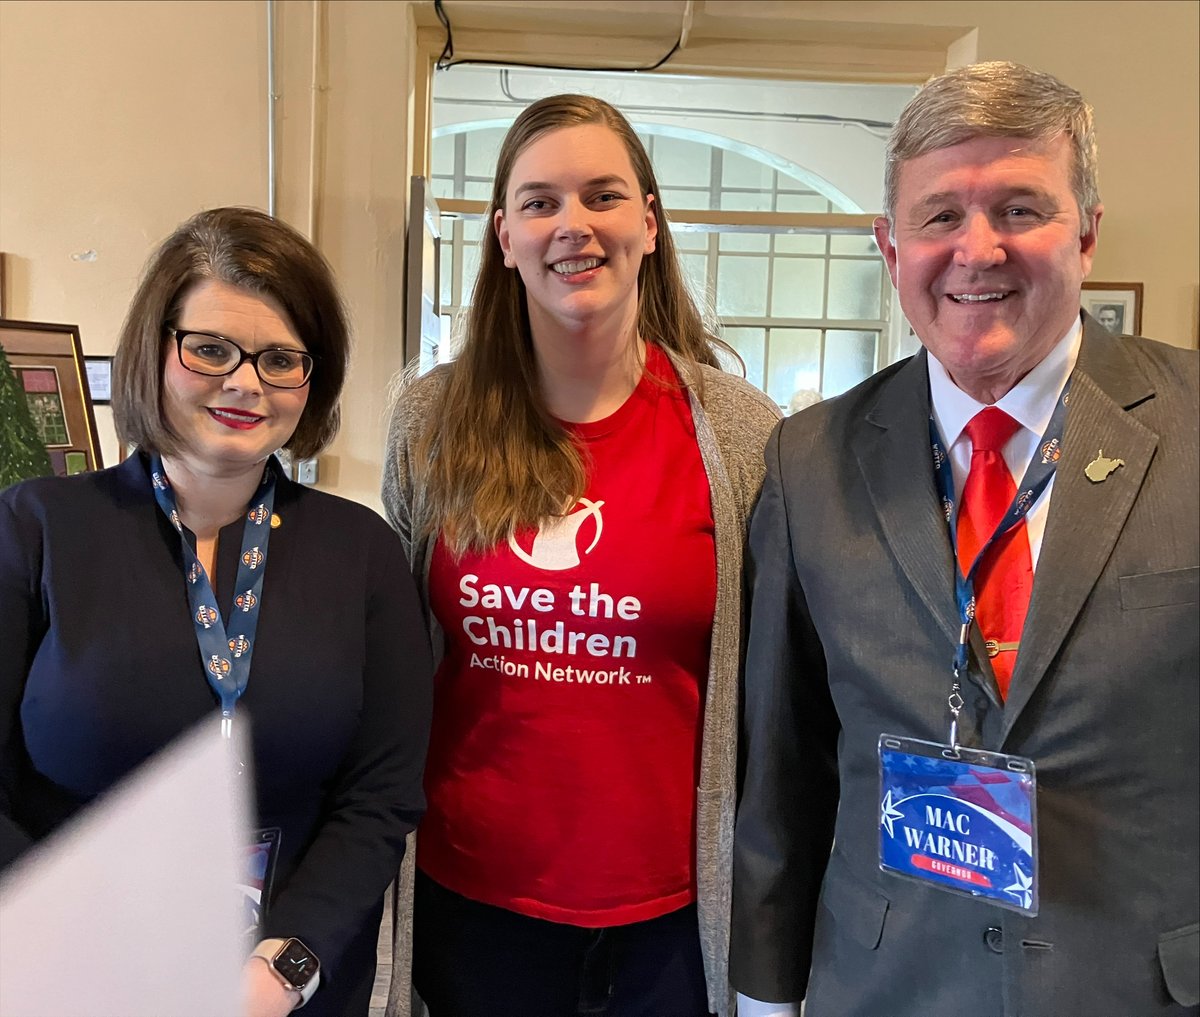 Kids across the state of West Virginia deserve quality early childhood education. We know it can set them up for success. It was great to hear @HeatherTully and @macwarner4gov share how they plan to #InvestInKids. We look forward to hearing more!